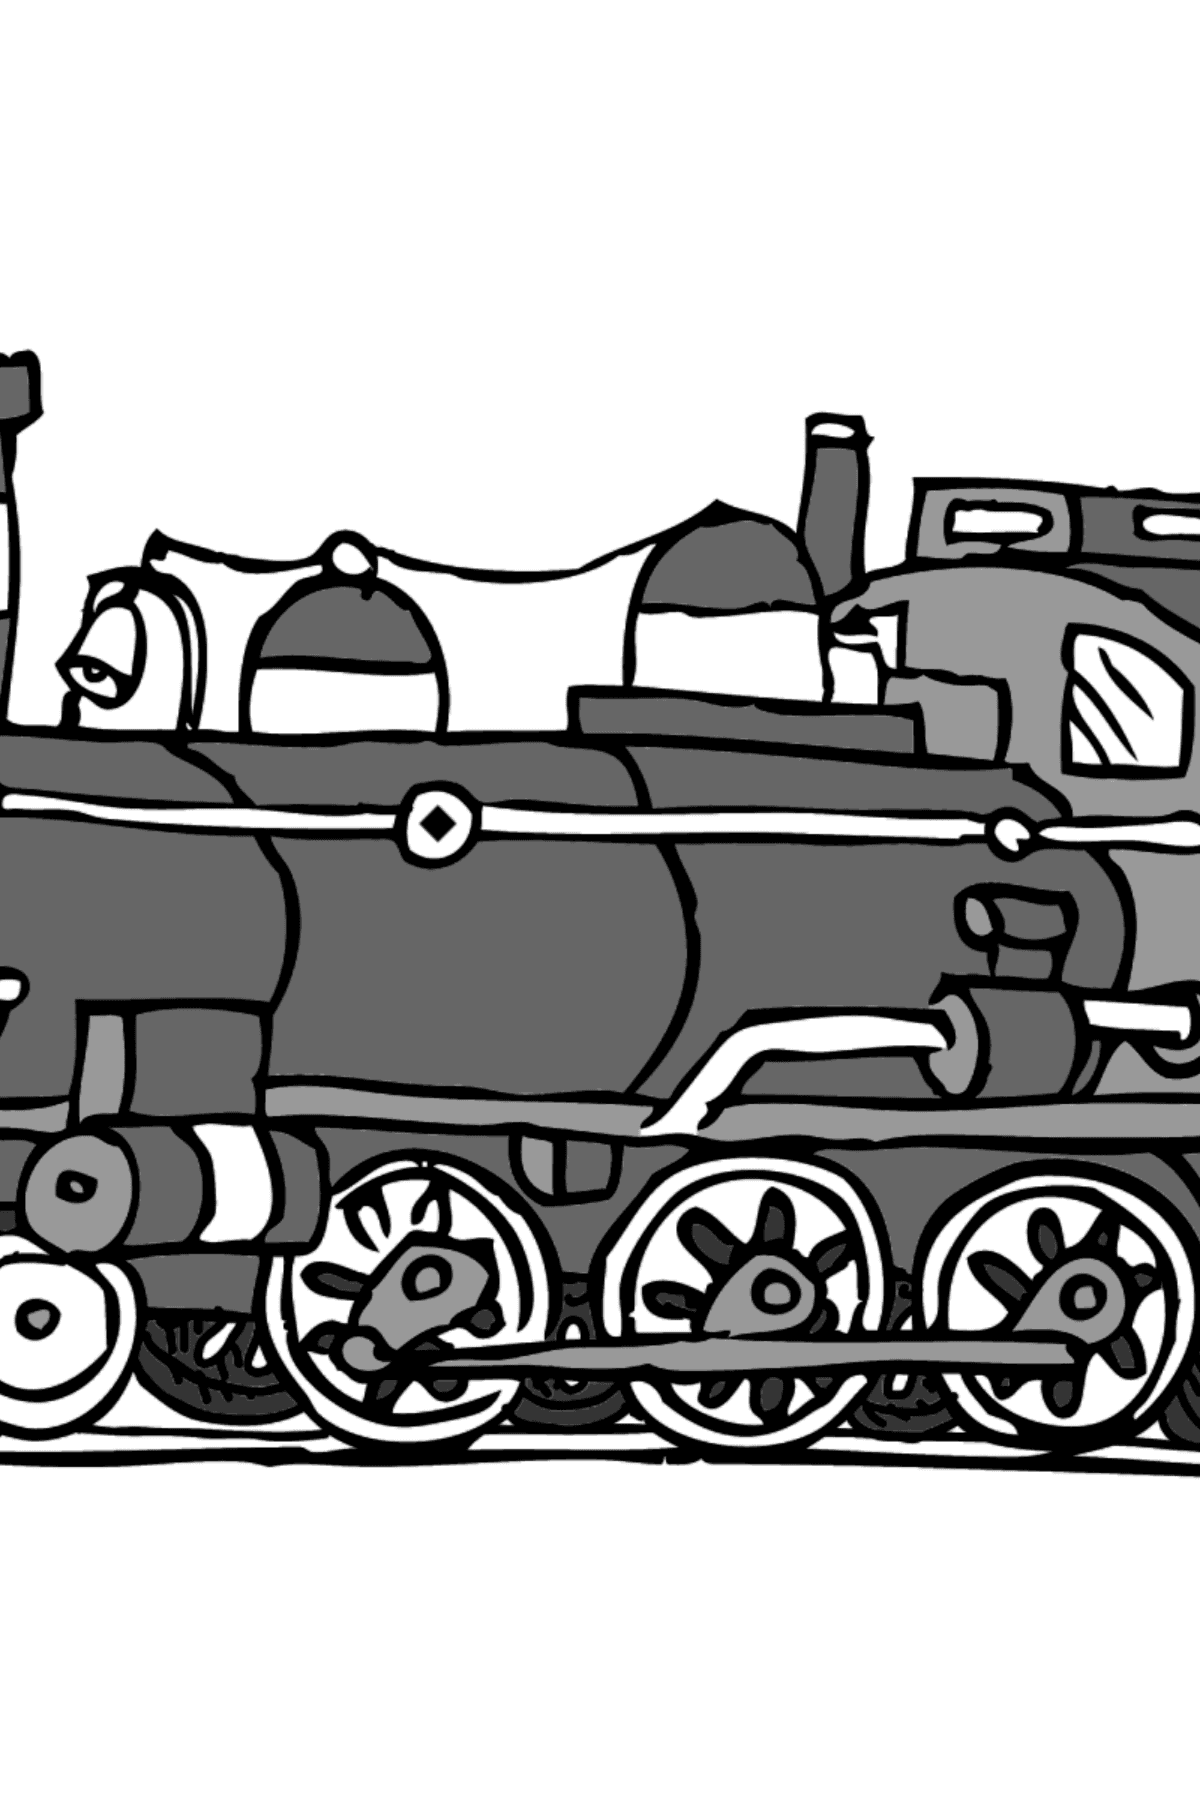 Coloring Page - A Locomotive - Coloring by Symbols and Geometric Shapes for Kids